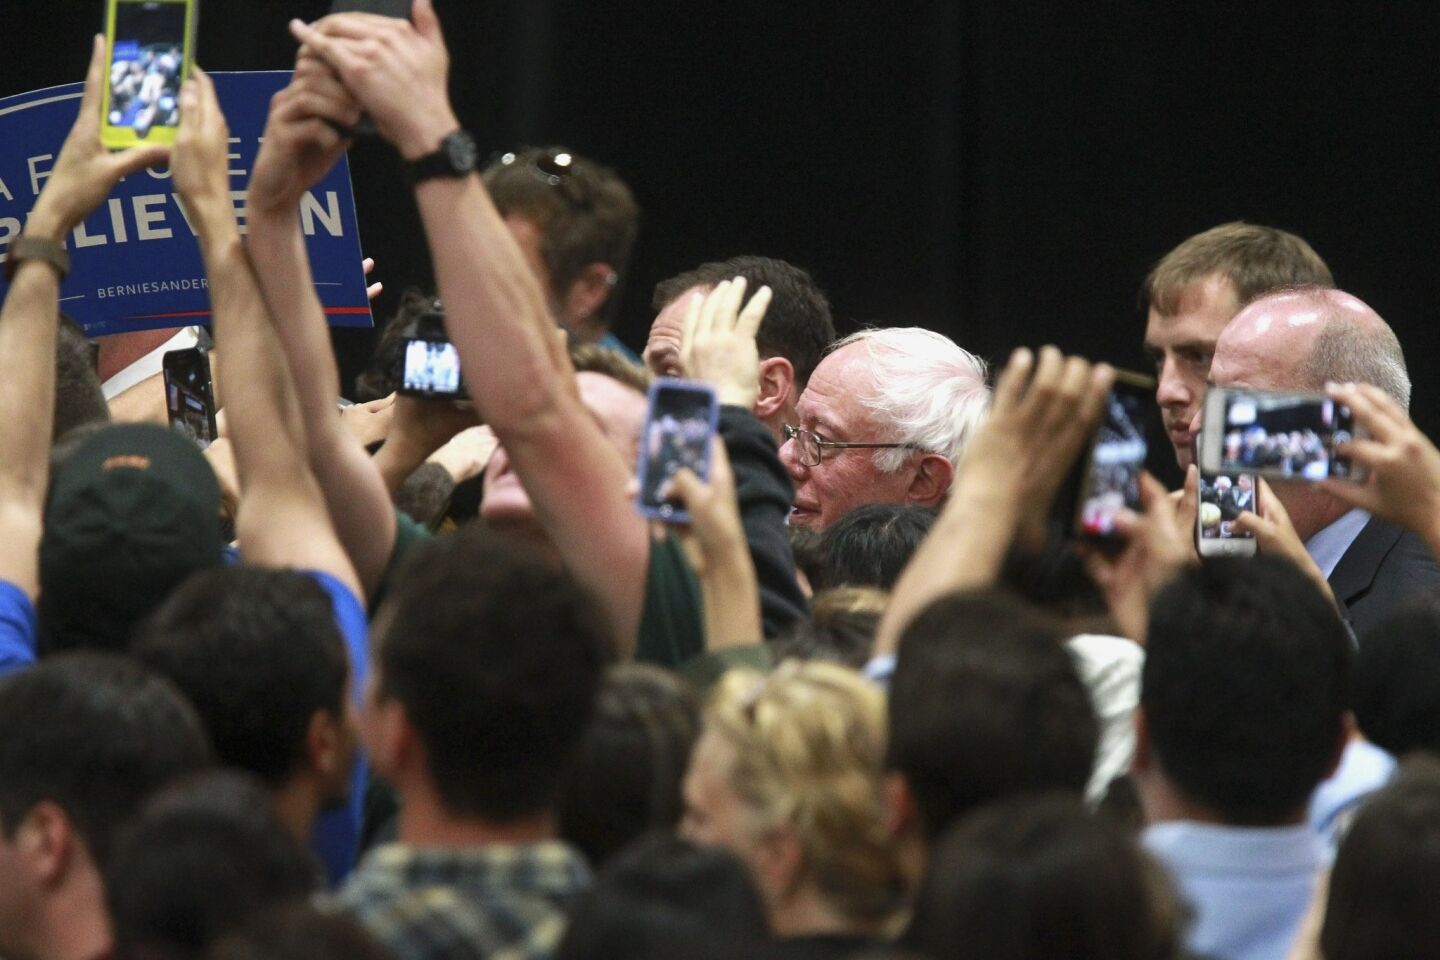 Democratic presidential candidate Bernie Sanders shakes hands with supporters as he exits after his speech.